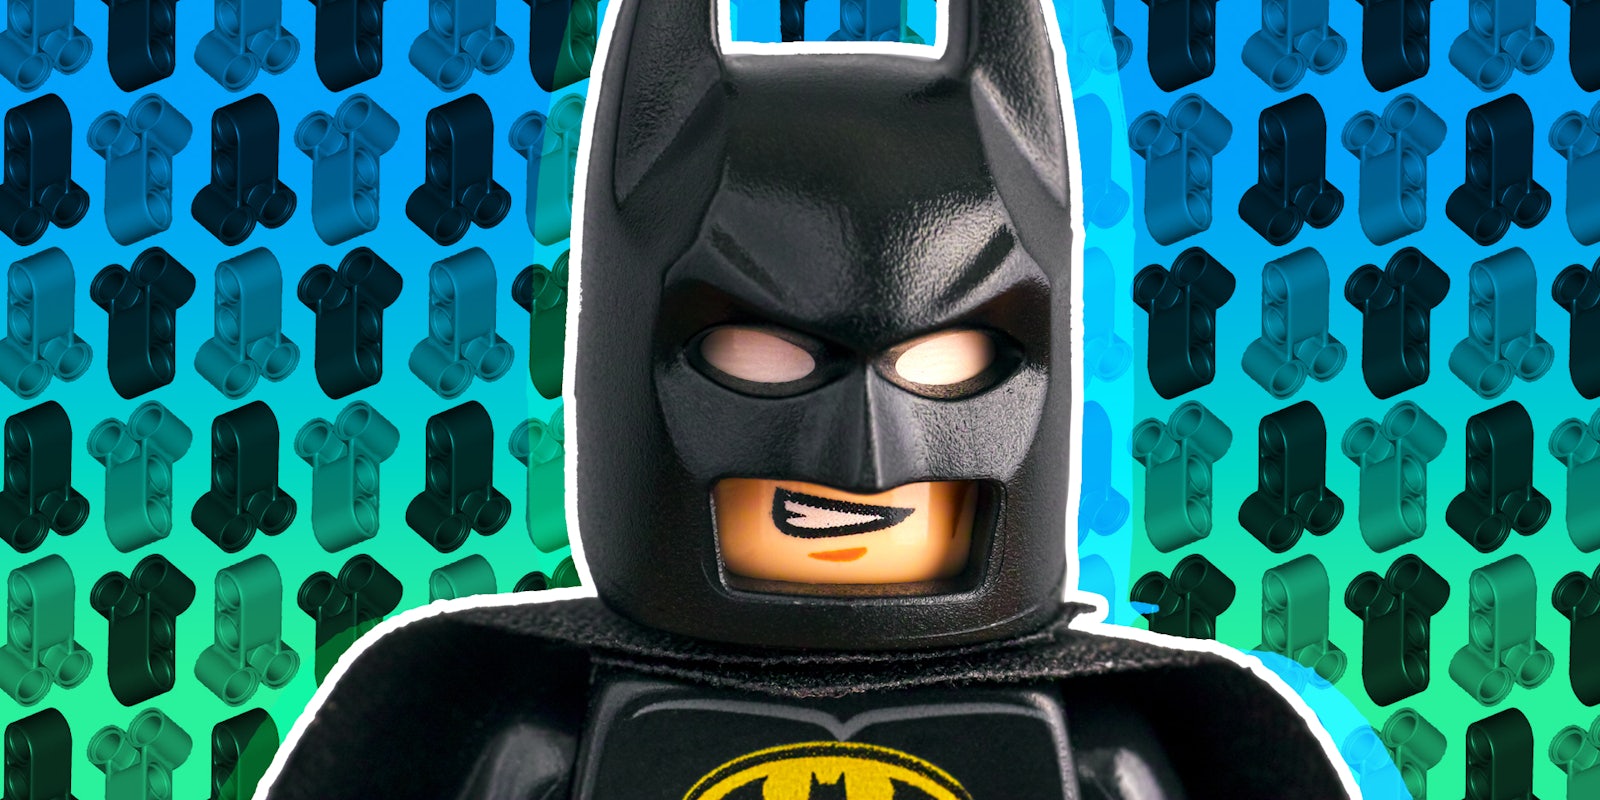 Lego batman over background of pieces 32557